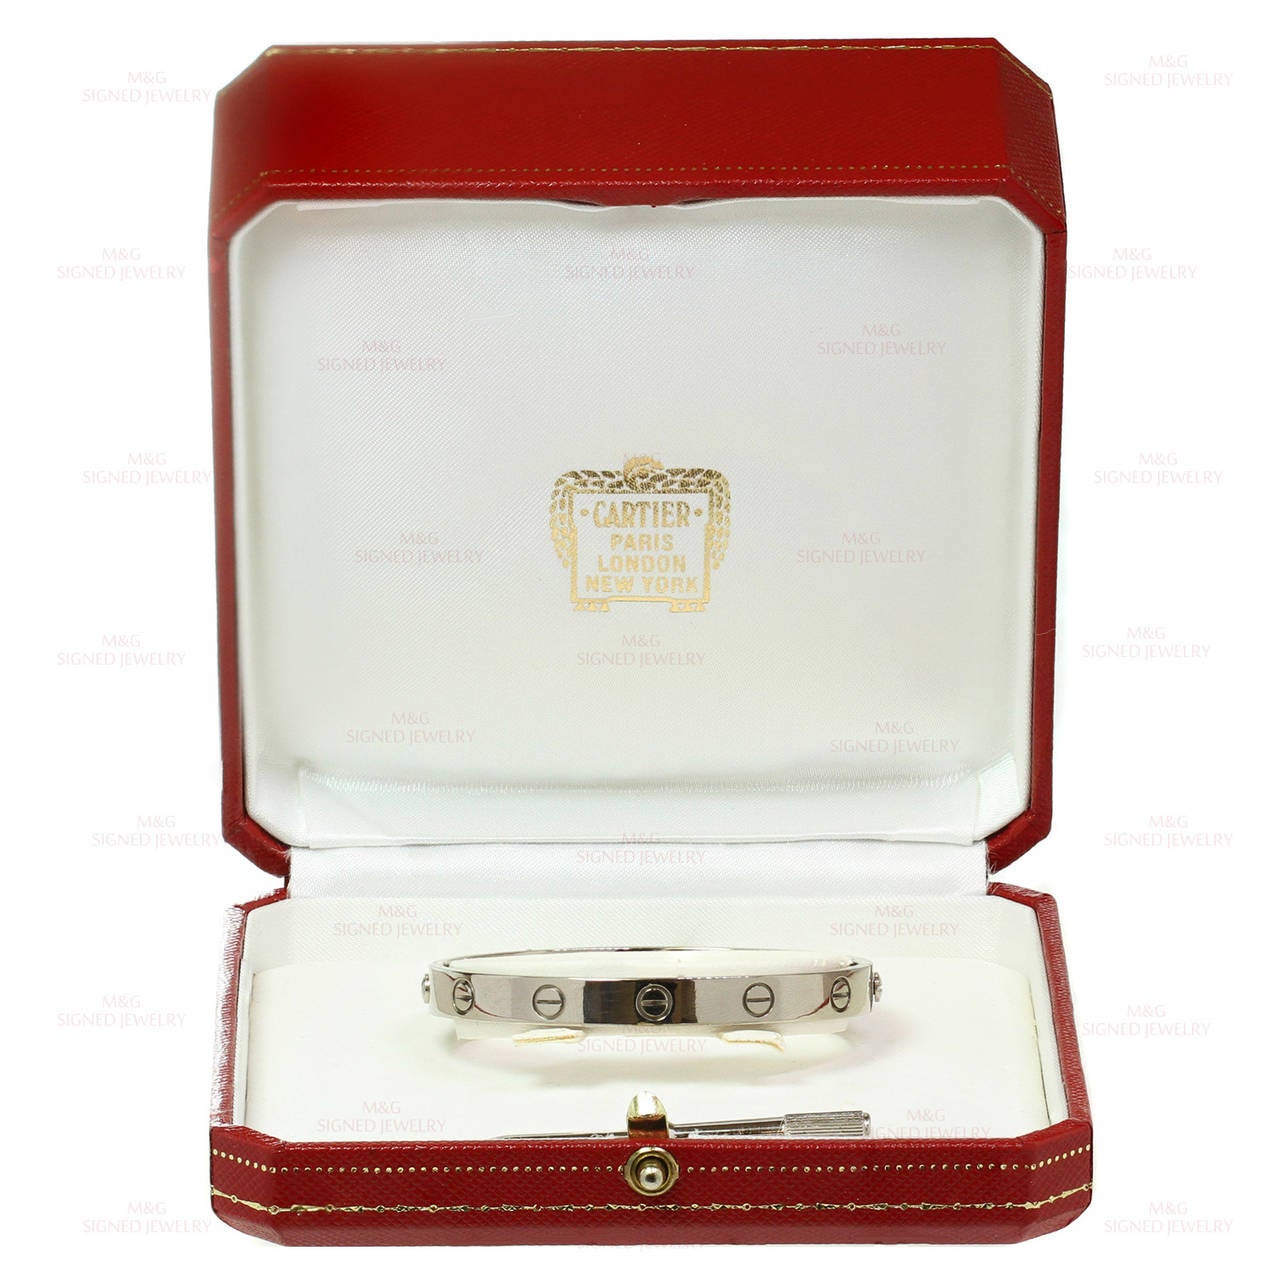 This iconic and timeless bracelet from Cartier's Love collection is finely crafted in 18k white gold and completed with the original Cartier screwdriver and box. This bangle is the size 16 model. Made in France circa 1993. . The estimated retail